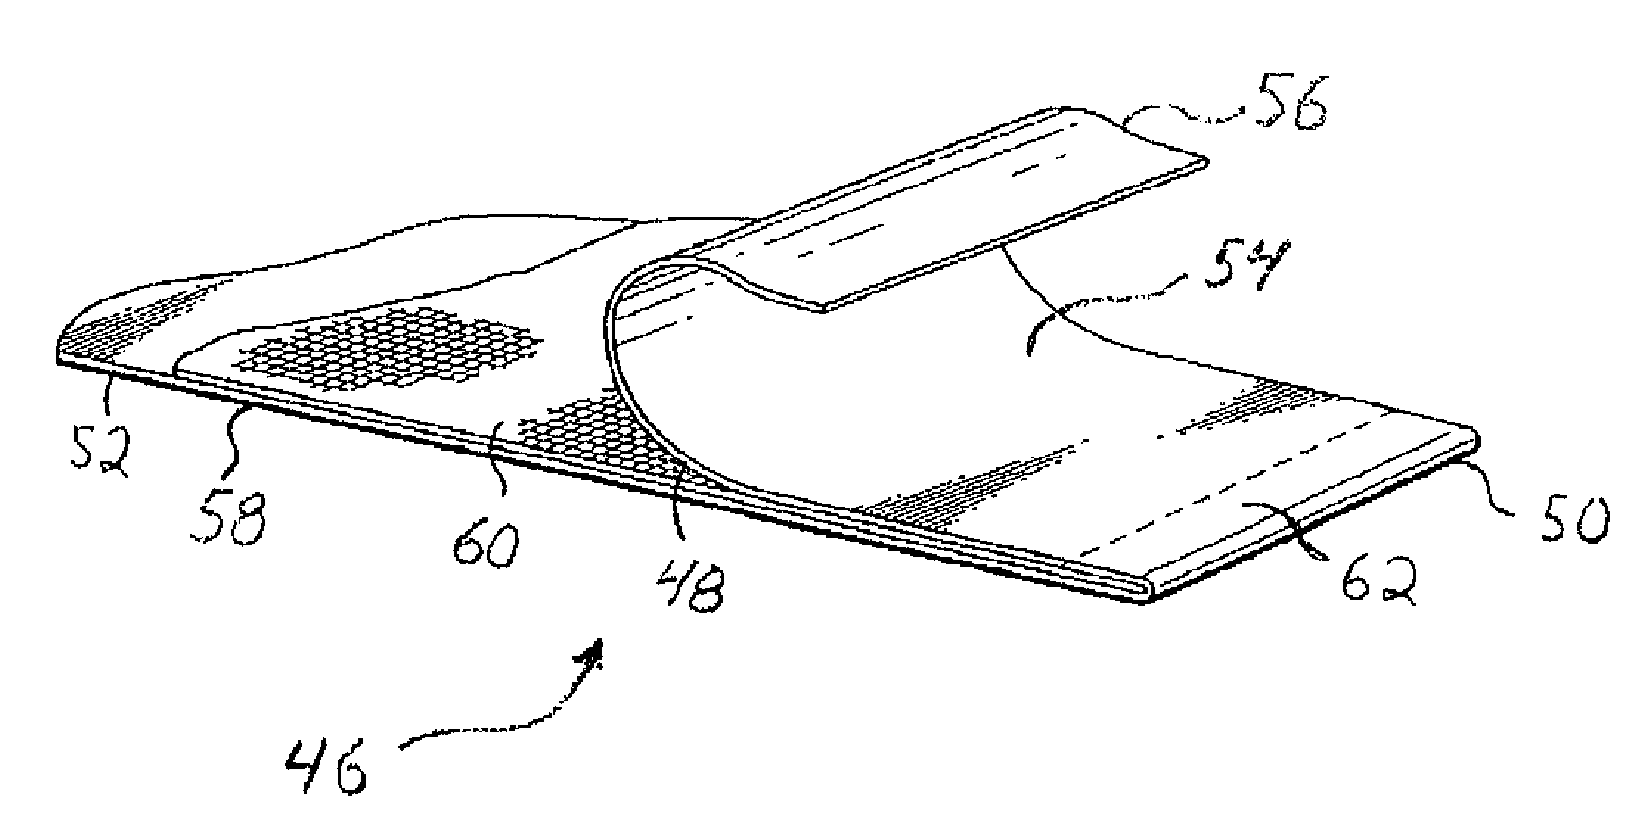 Membrane leaf packet with reinforced fold